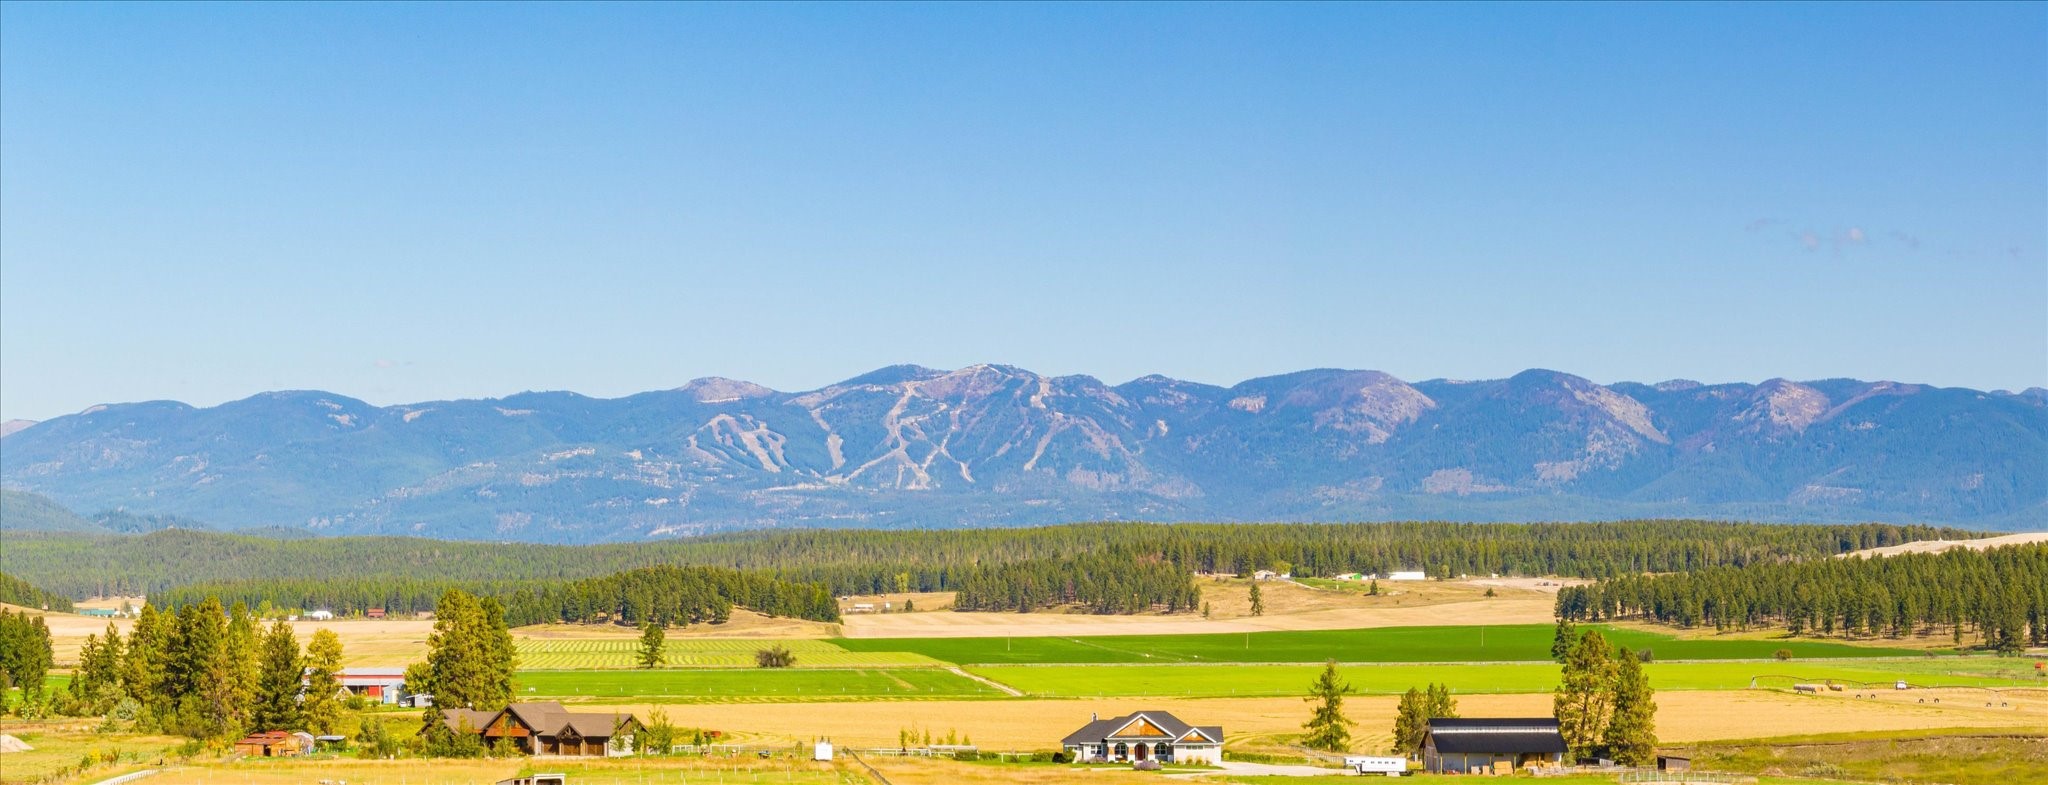 RARE FIND! NOW INCLUDES completed blue prints for 3500 sq. ft. home! Jewel, one-of-a-kind lot in peaceful, popular Harvest View Subdivision, midway between Kalispell & Whitefish in fantastic country setting with 360 degree mountain views to include straight on open view to Whitefish Ski Resort. Lot is in perfect location, not far from entry, adjacent to open lot for community water system & backs to large open space! Suburb .73 acre perfect rectangle slightly sloped lot makes it easy to build your dream home! Subdivision offers community water system, septic approval, road maintenance included in HOA & located in ever popular Whitefish School District. Location boasts sweet country setting with a short drive to Glacier International Airport, not far from Bypass offering access to all services, a short drive to Flathead Lake, many of our amazing rivers & less than an hour to Glacier National Park. It's a great location! Contact Renee' Howe @ 406-885-4693 or your real estate professional